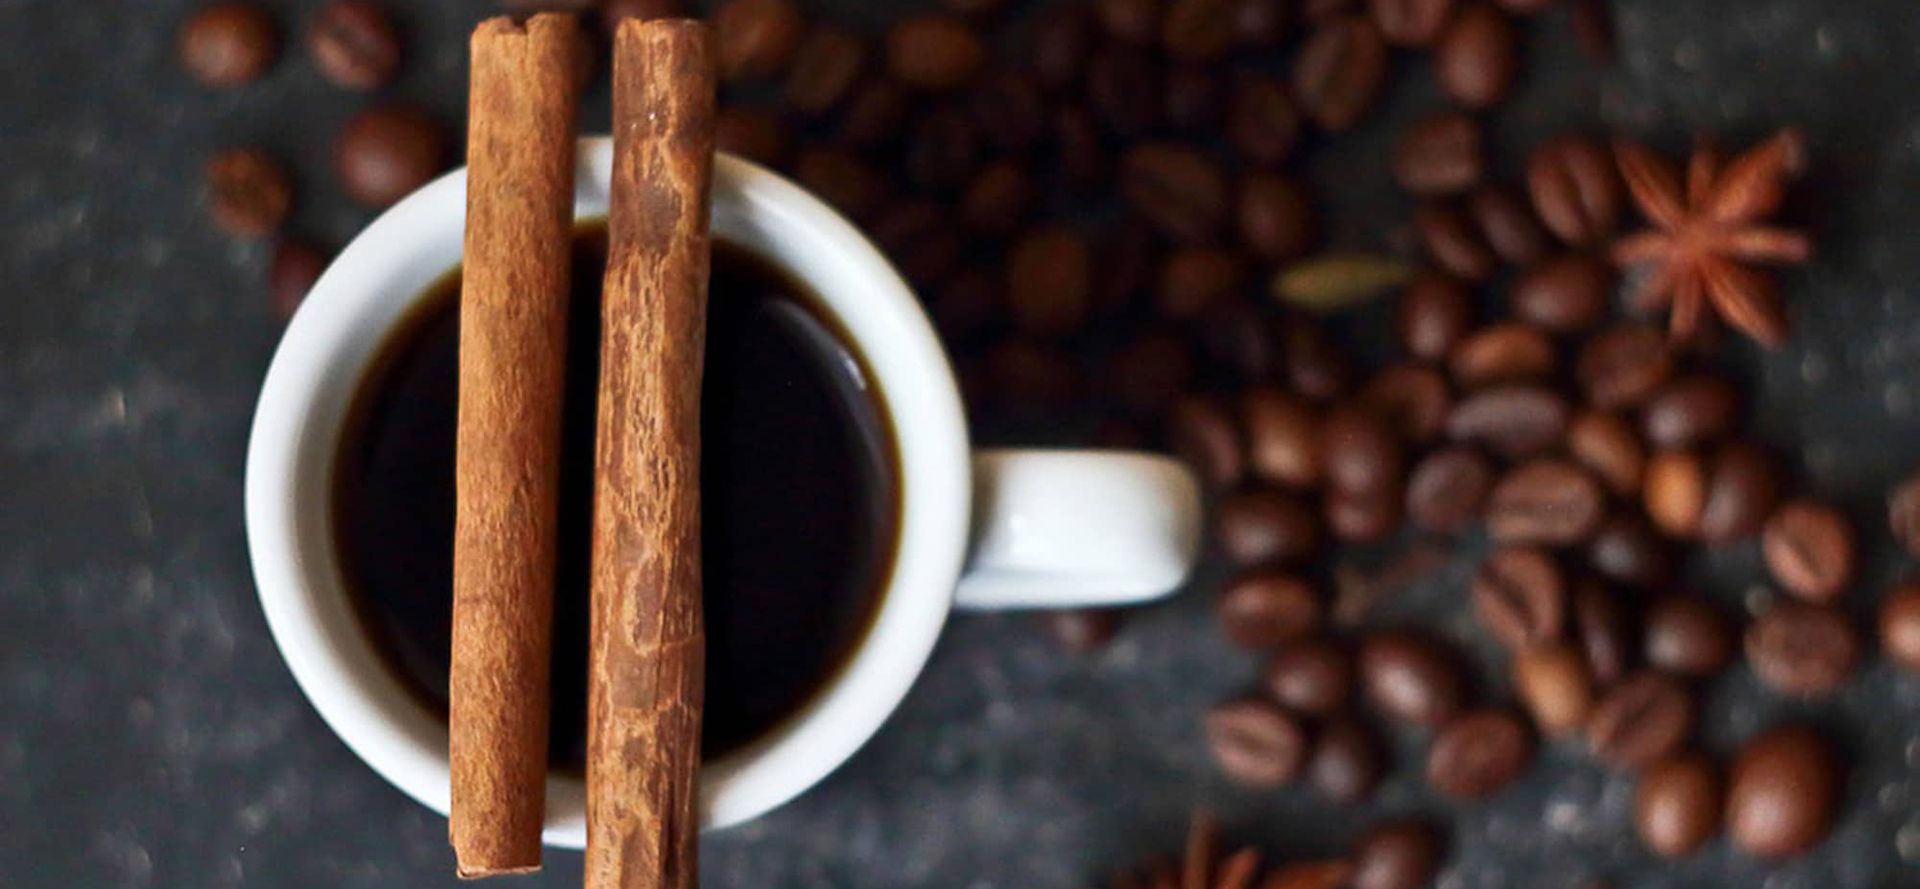 A cup of coffee with cinnamon sticks and coffee beans.